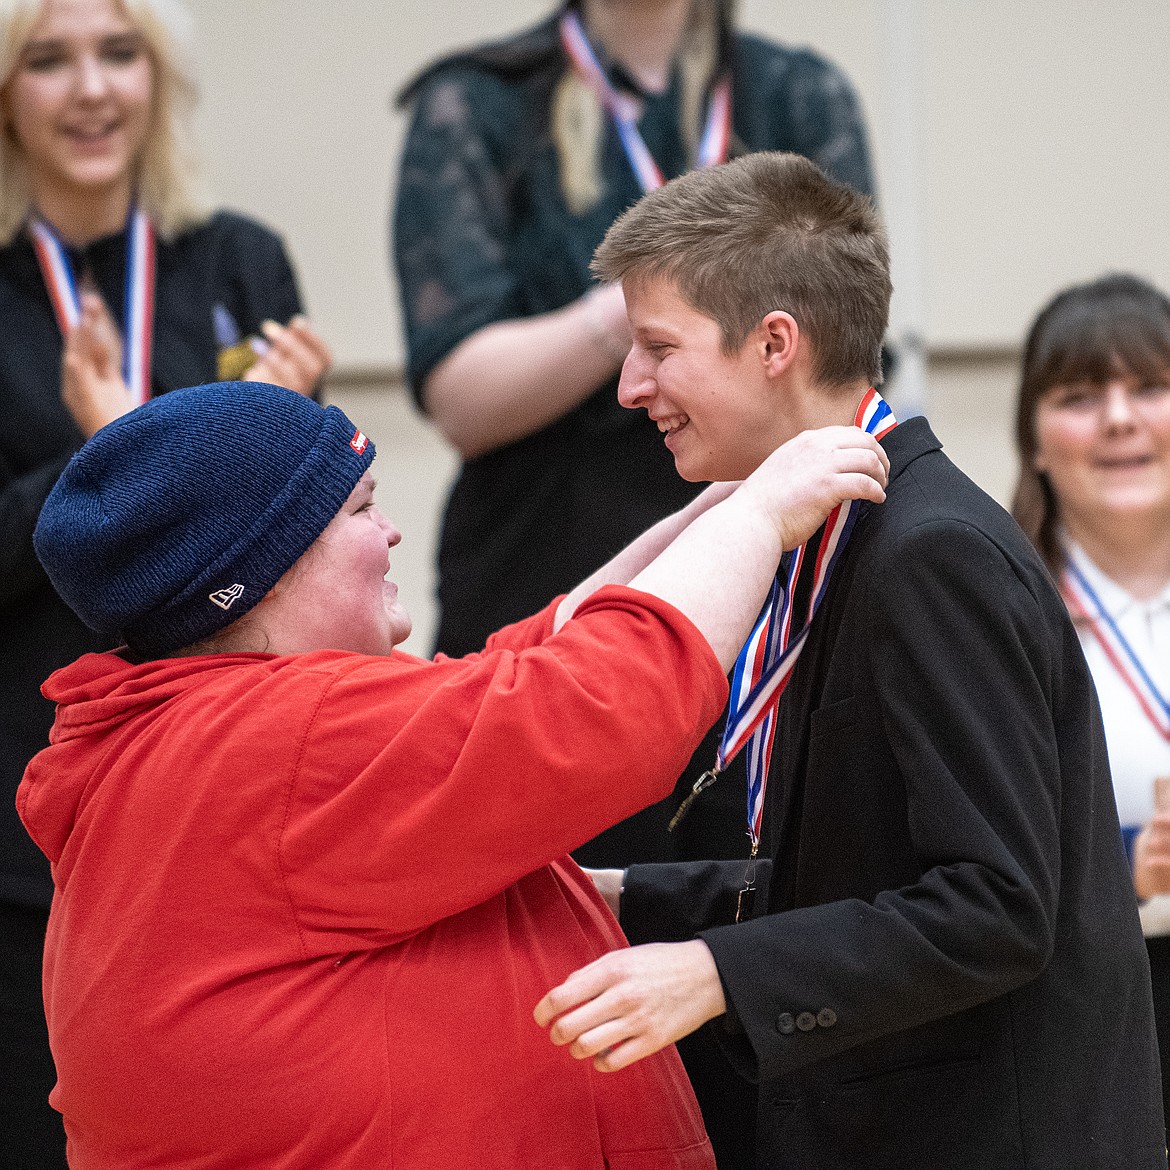 Ruby Davis (right) receives her first place medal in Informative from coach Alix Major at the State A Speech Tournament in Columbia Falls Saturday, Jan 27. (Avery Howe photo)